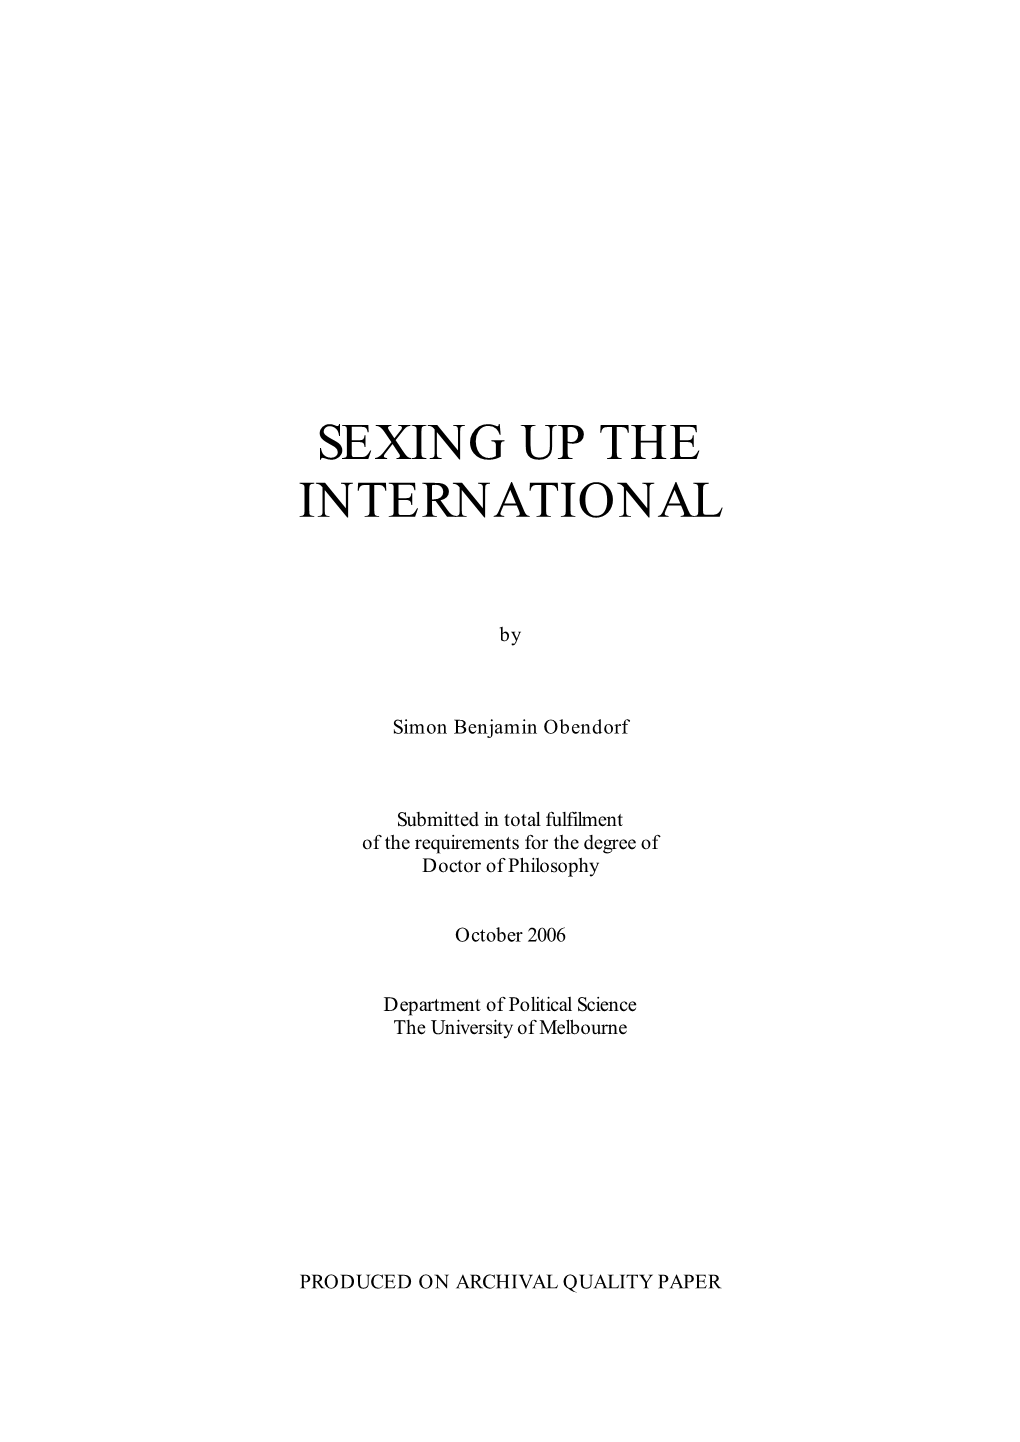 Sexing up the International